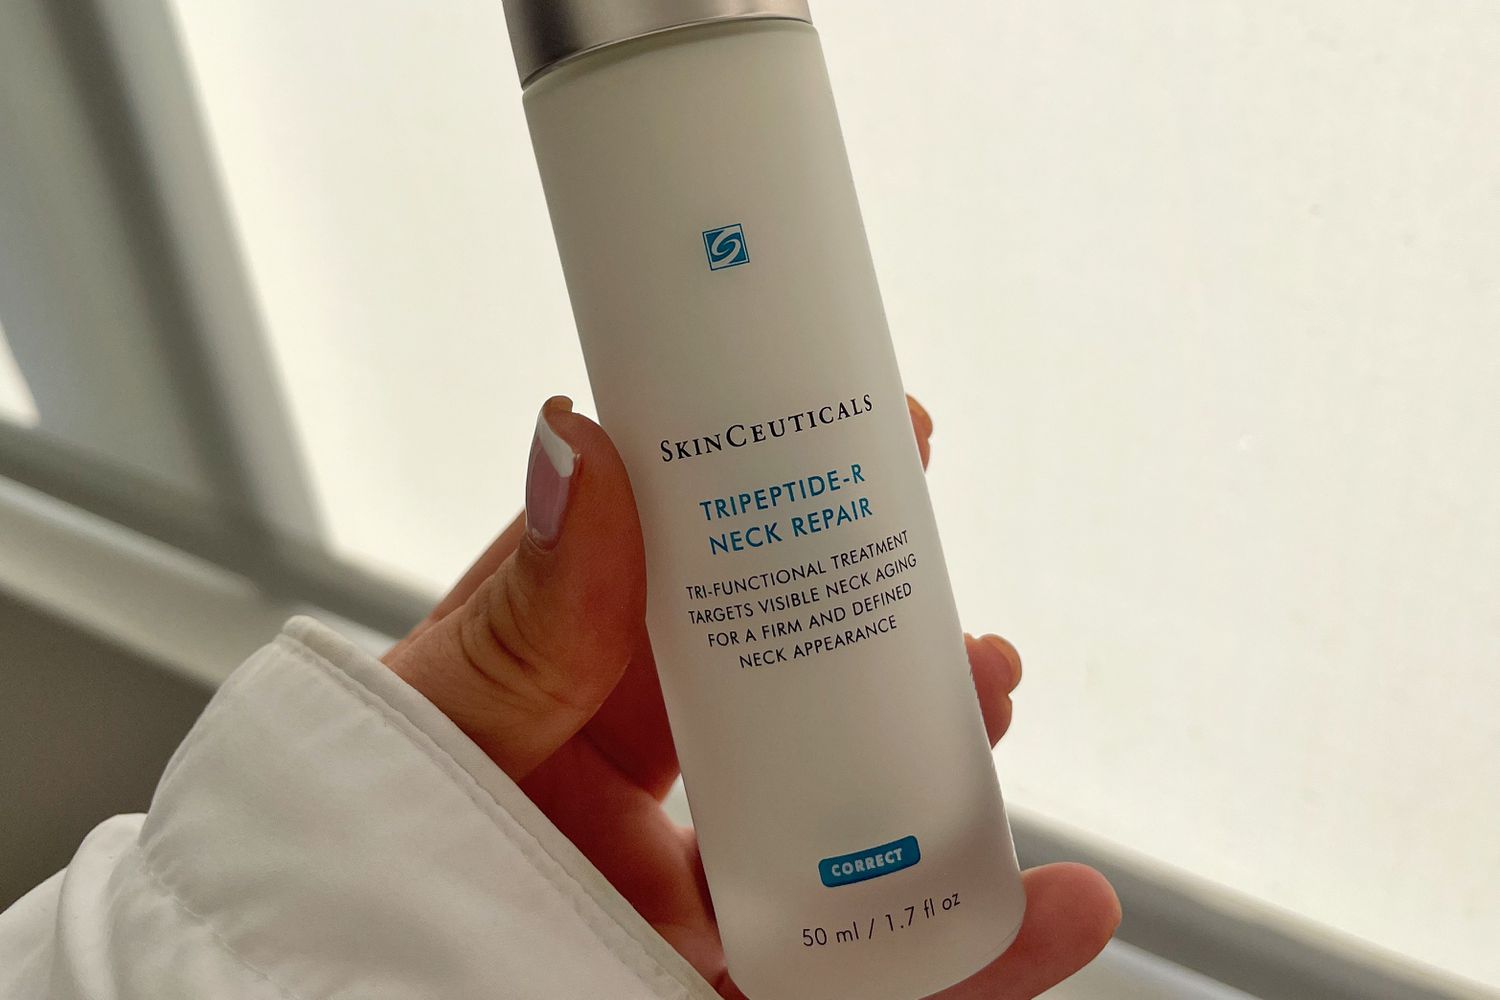 A person holds up a jar of SkinCeuticals Tripeptide-R Neck Repair